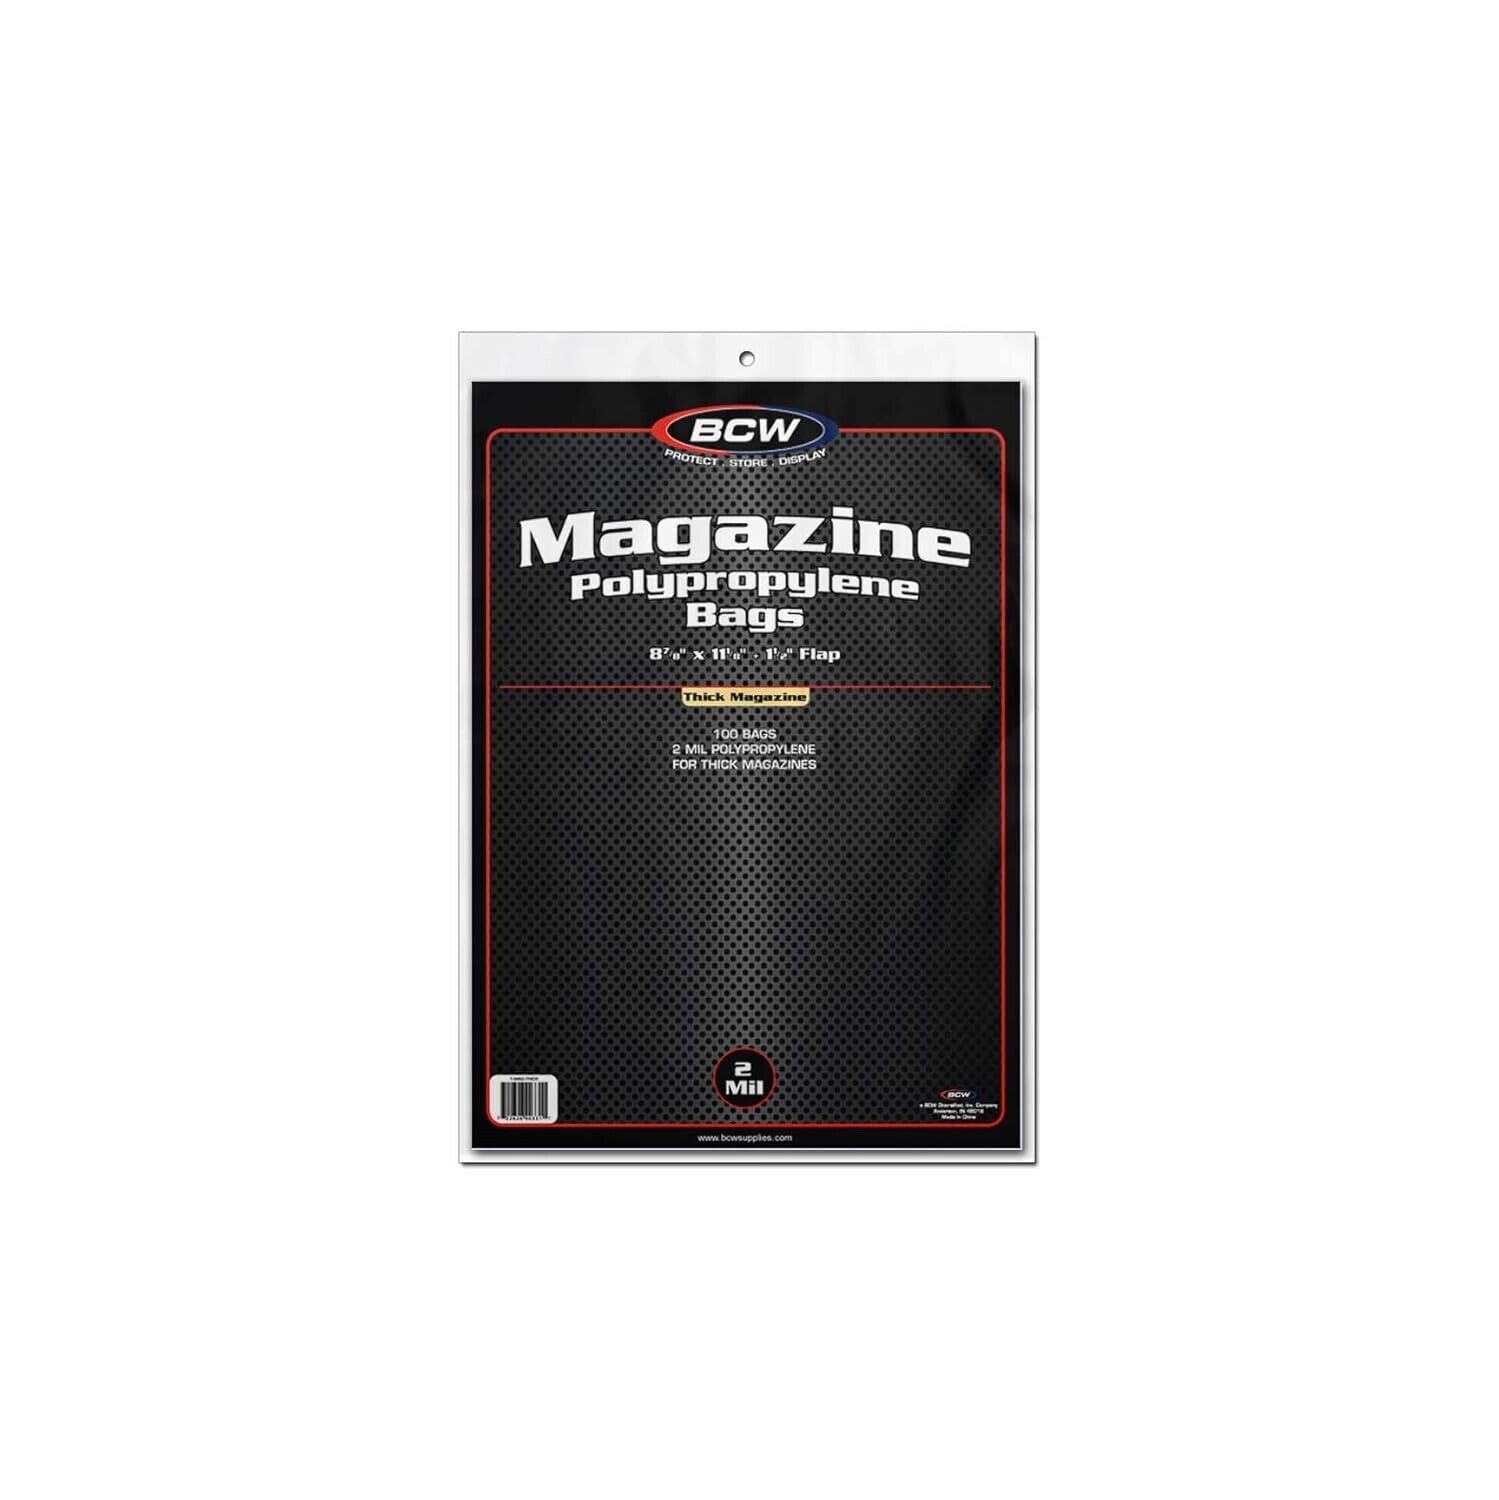 BCW Thick Magazine Bags - 1 Pack of 100 | Acid-Free, Clear Polypropylene Sleeves